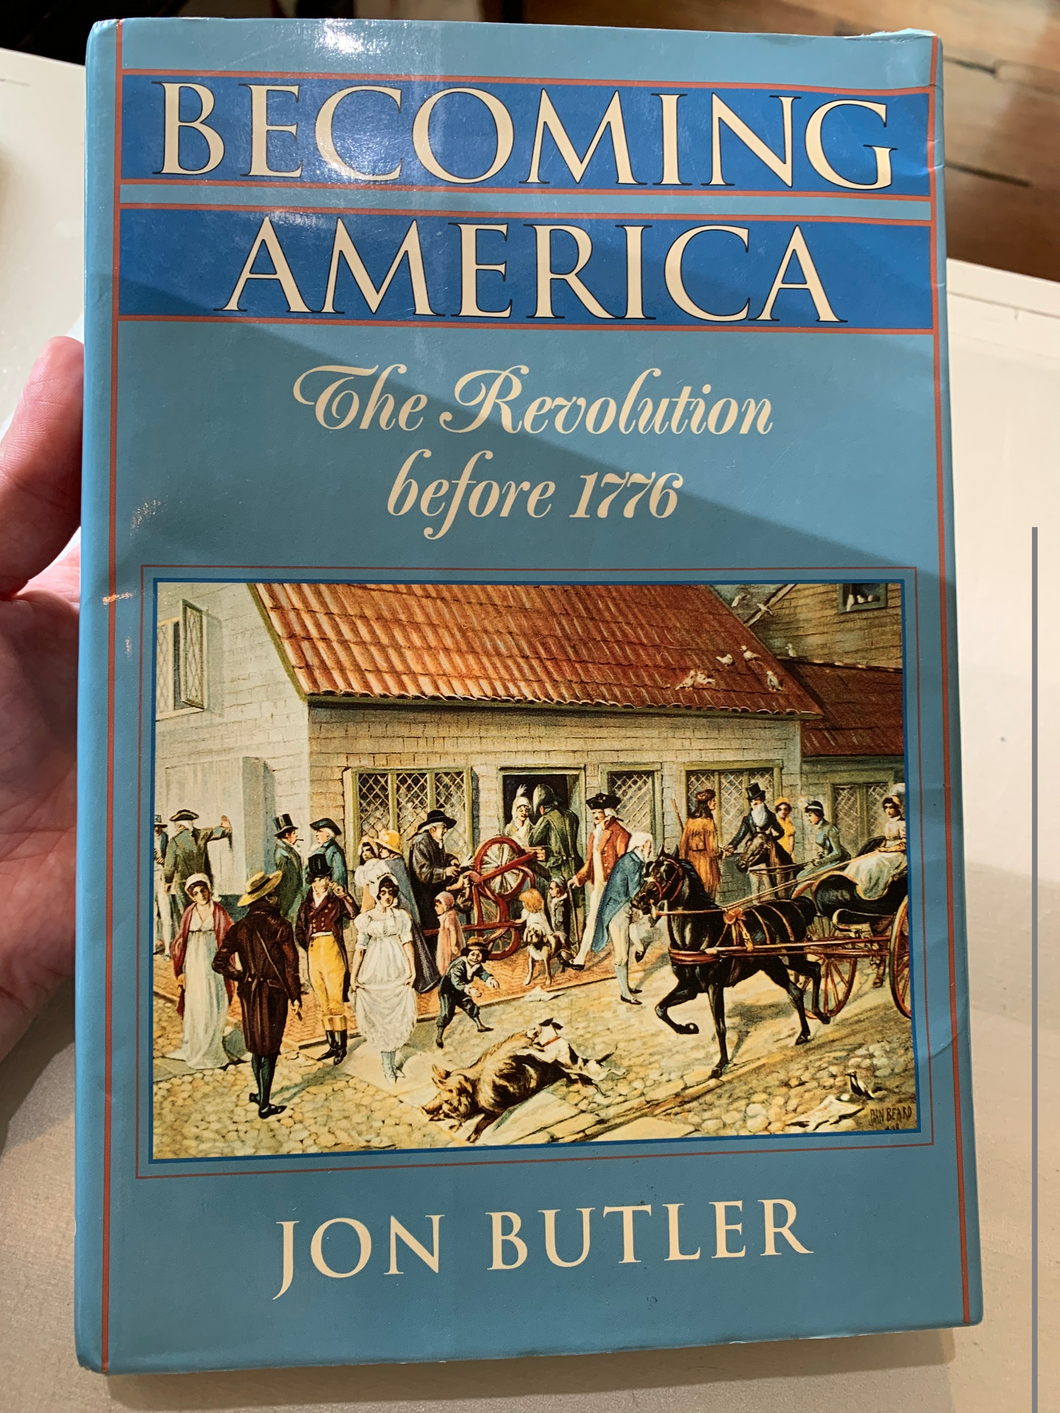 'Becoming America: The Revolution before 1776'